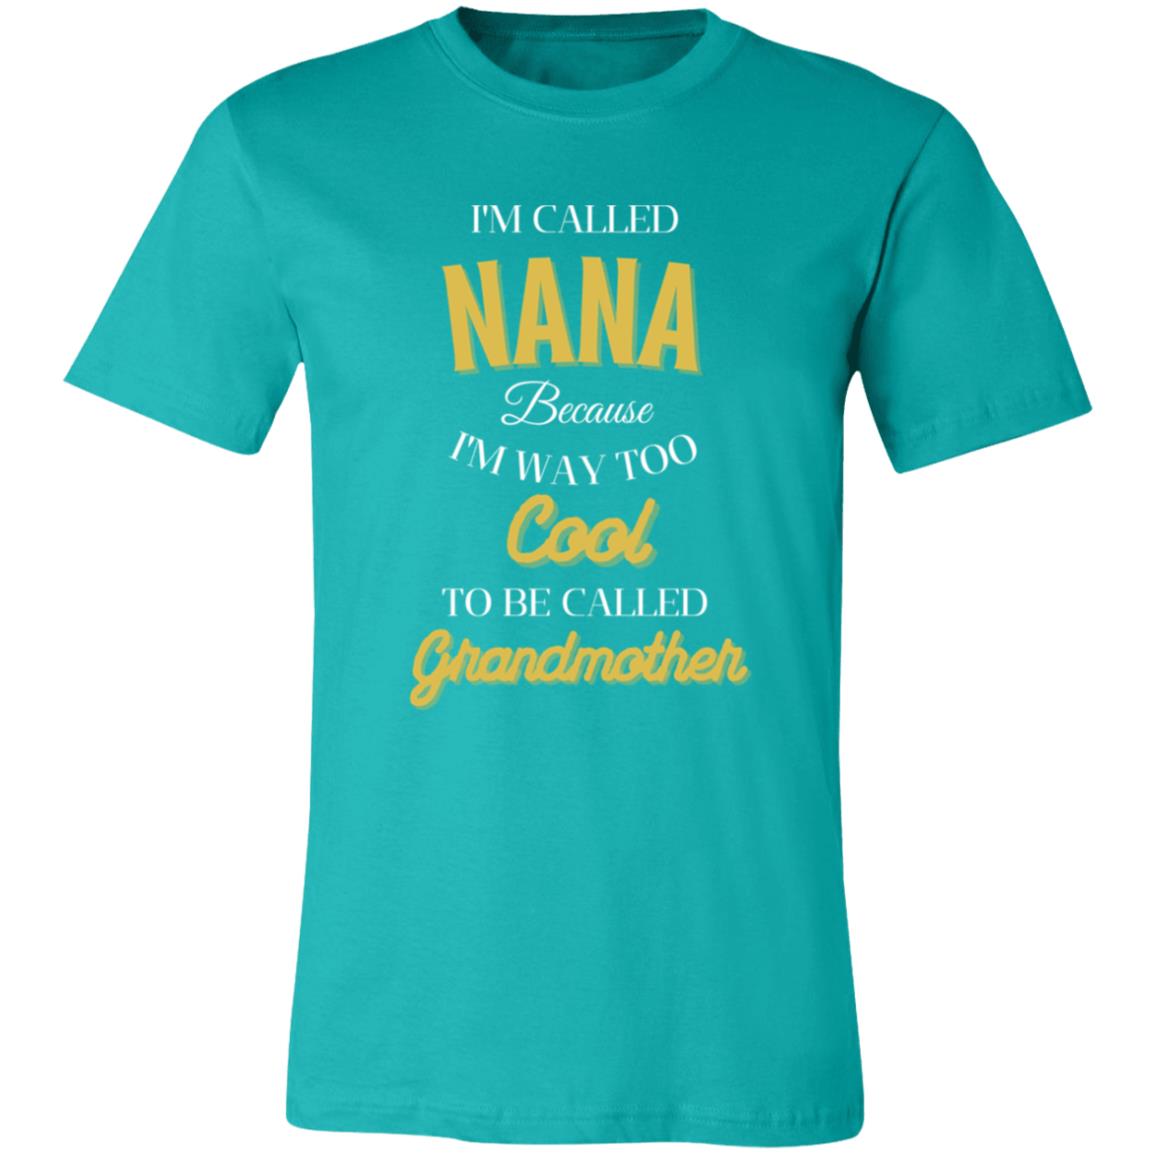 TO COOL TO BE CALLED GRANDMOTHER -Jersey Short-Sleeve Shirt